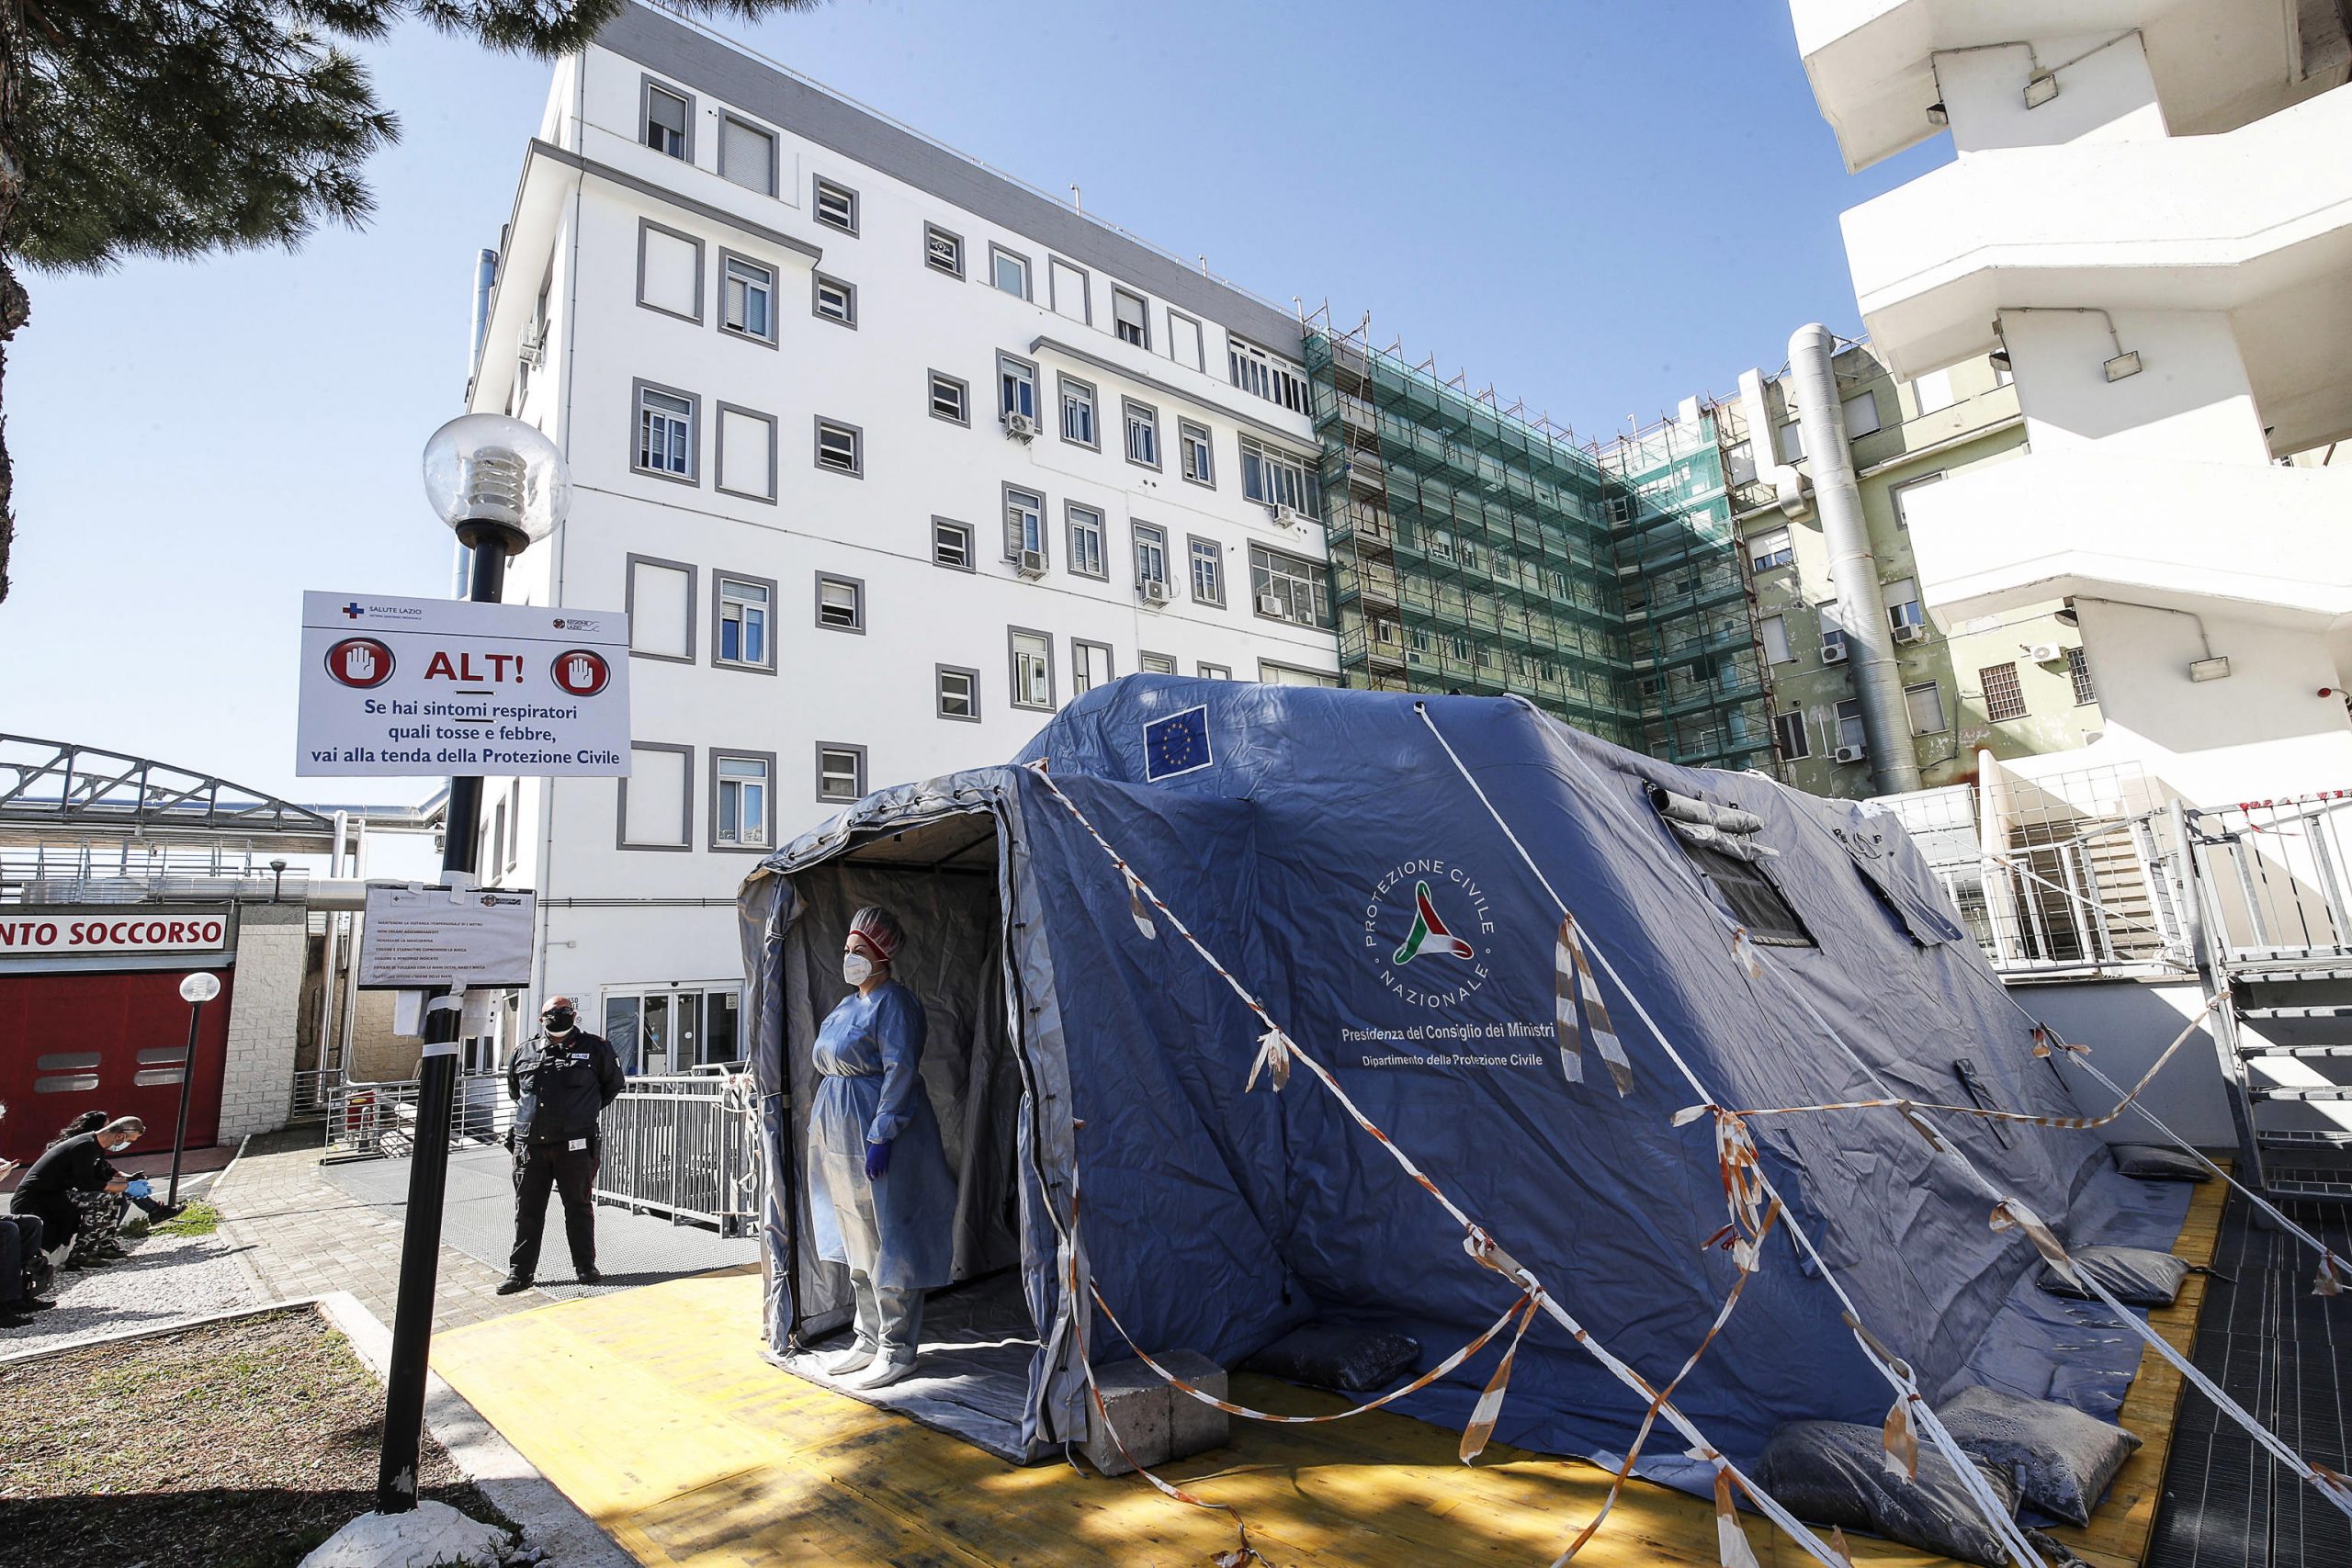 epa08382262 View of a tent serving as a COVID-19 testing facility in front of the San Paolo hospital in Civitavecchia, Italy, 23 April 2020 (issued on 24 April 2020), amid the ongoing coronavirus COVID-19 pandemic.  EPA/GIUSEPPE LAMI